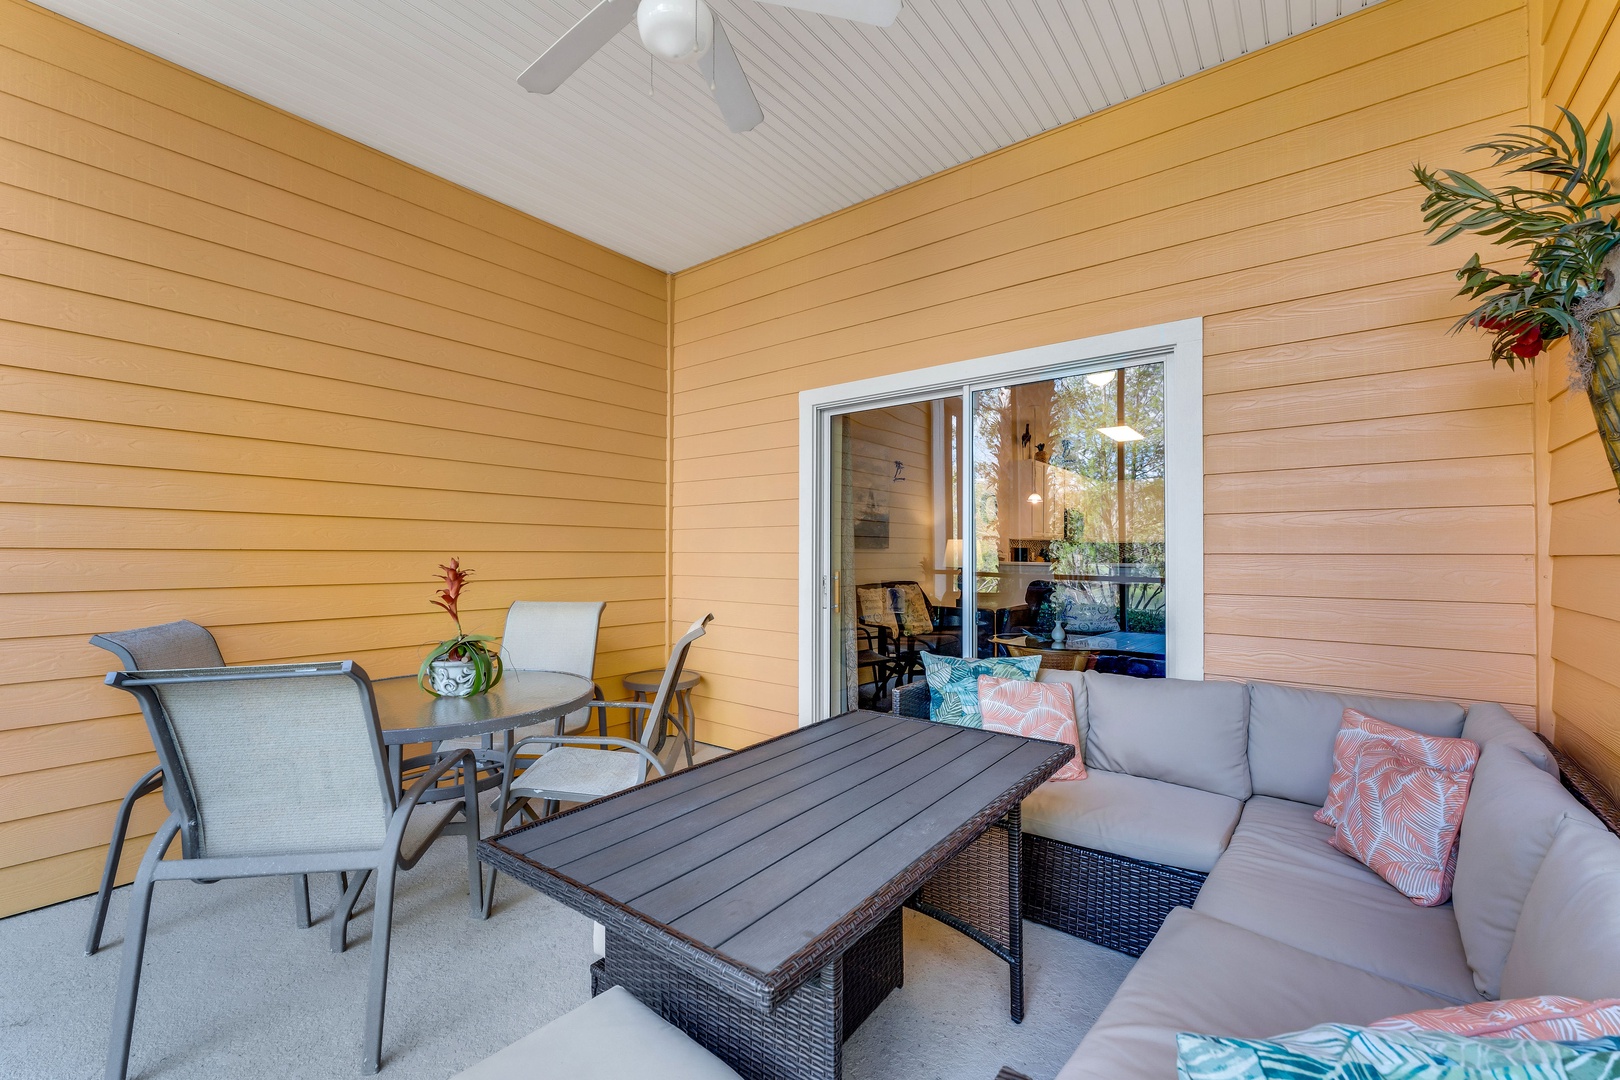 Lounge the day away or dine in the fresh air on the screened patio